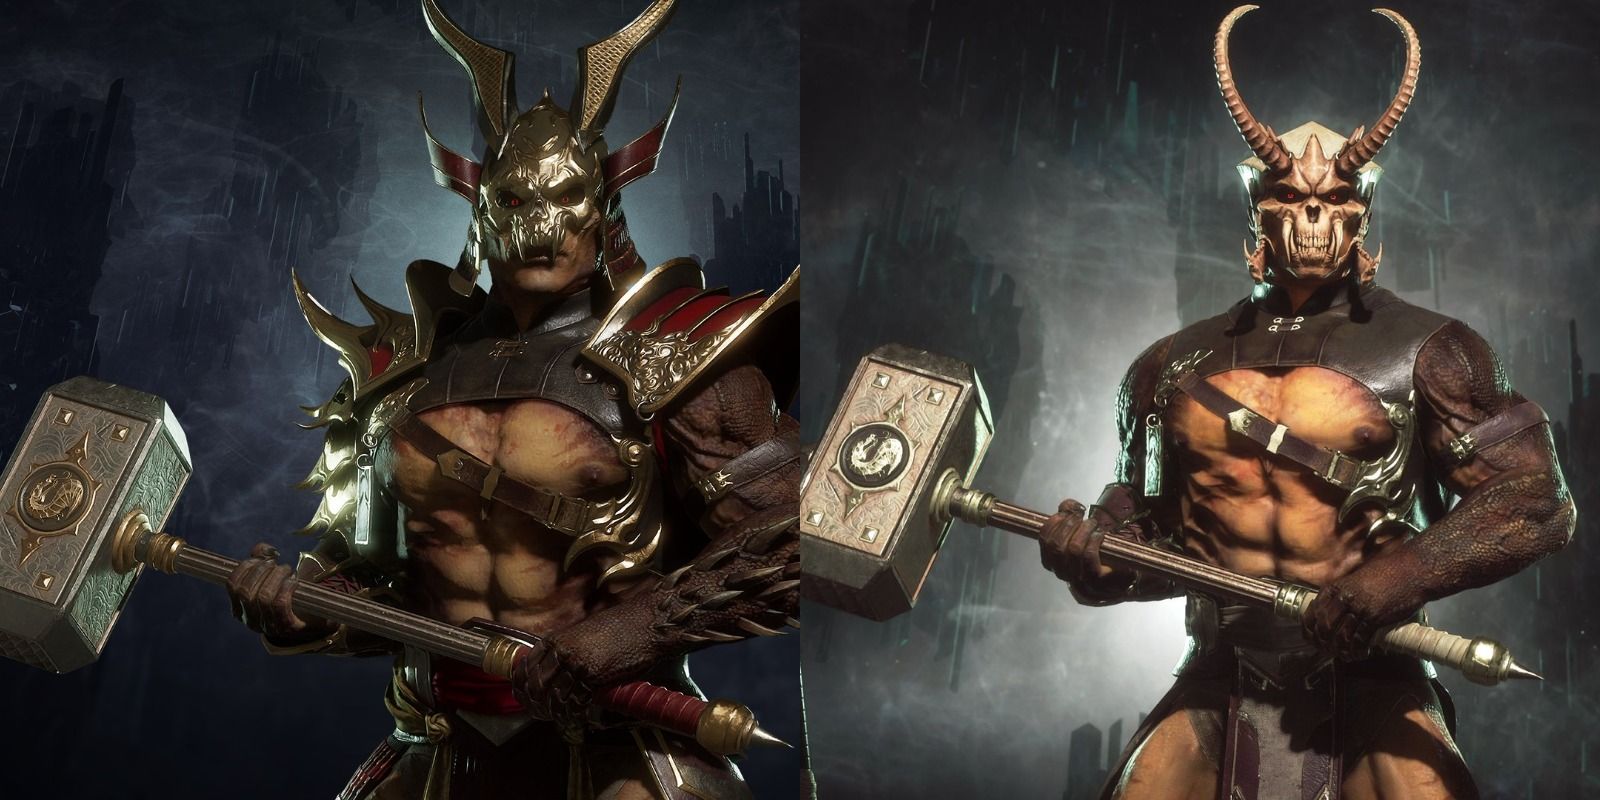 Different loadouts for Shao Kahn in Mortal Kombat 11